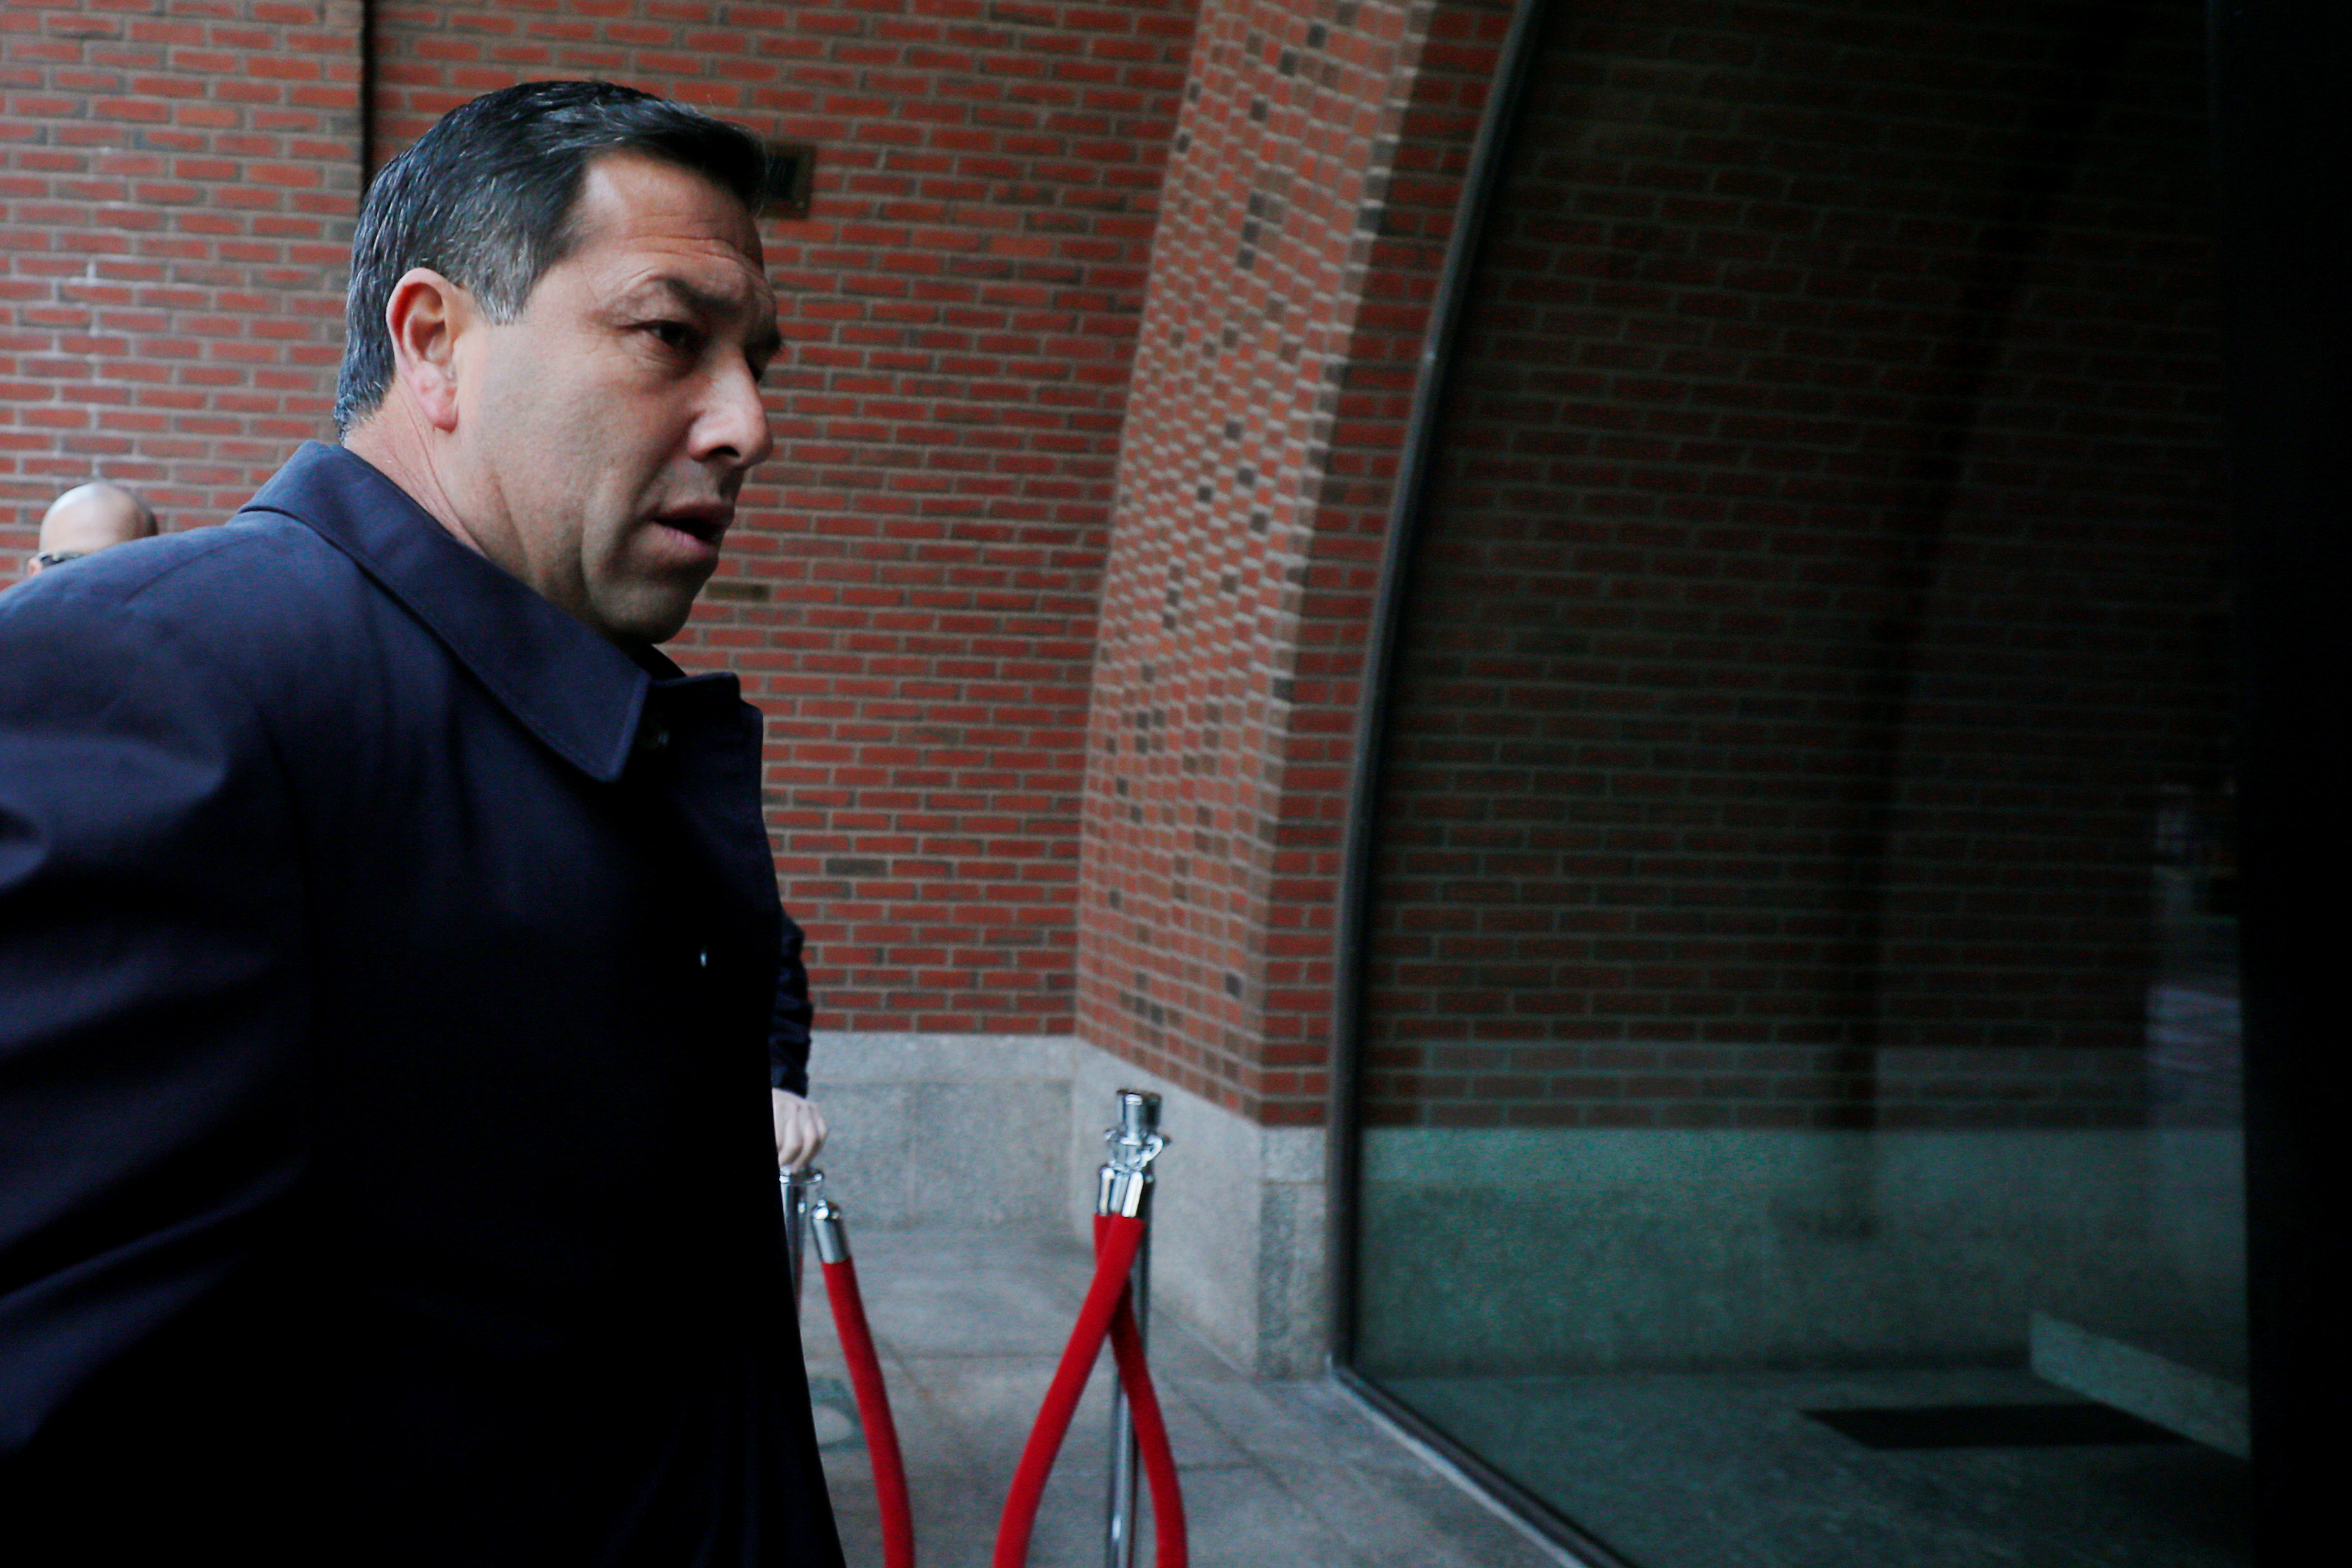 Jorge Salcedo arrives at the federal courthouse in Boston